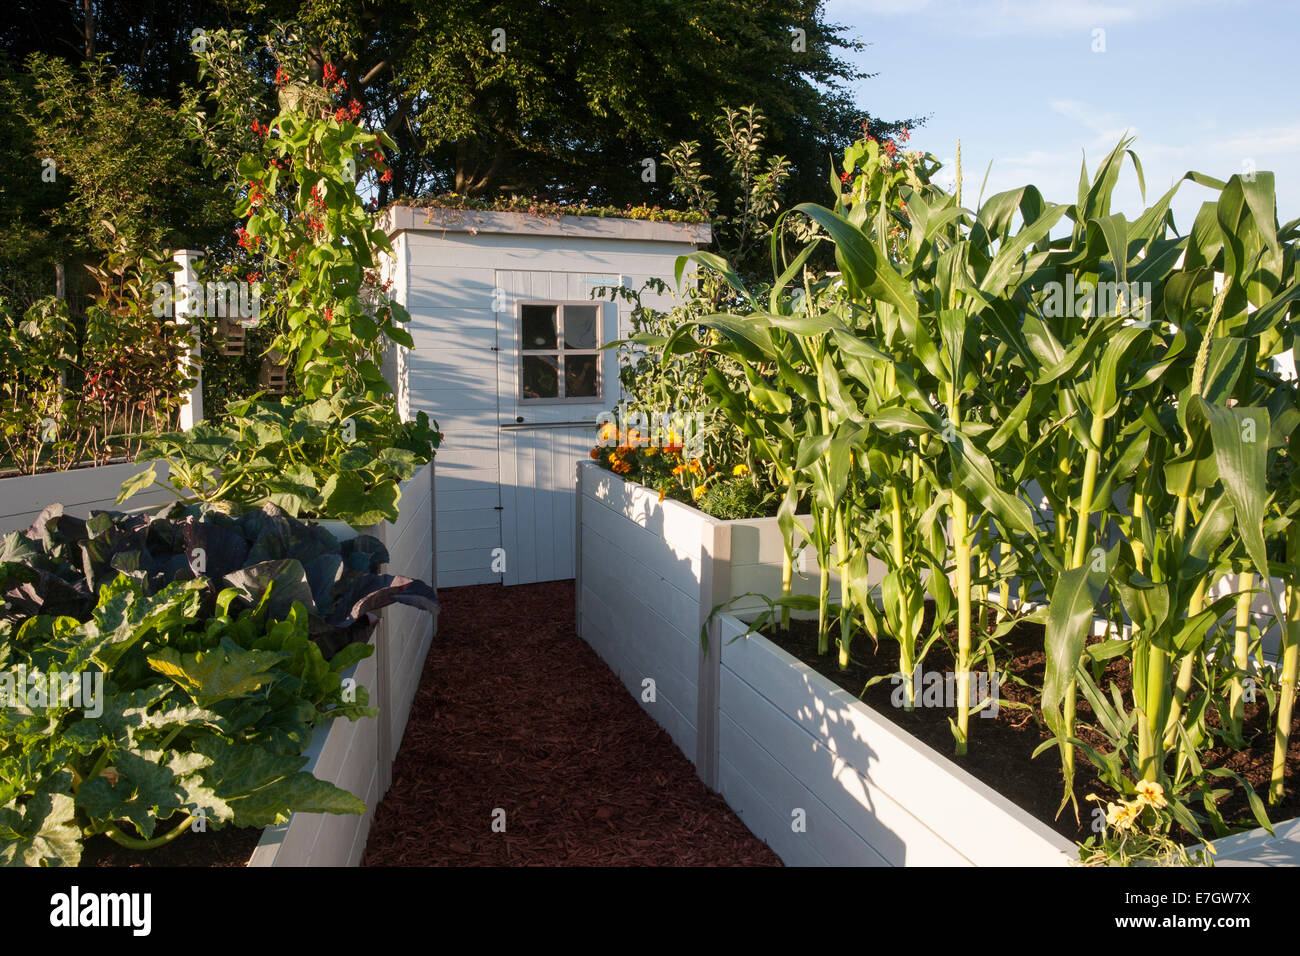 small organic vegetable kitchen garden with raised beds bed growing sweetcorn Saville and runner beans painted garden shed on allotment UK England Stock Photo